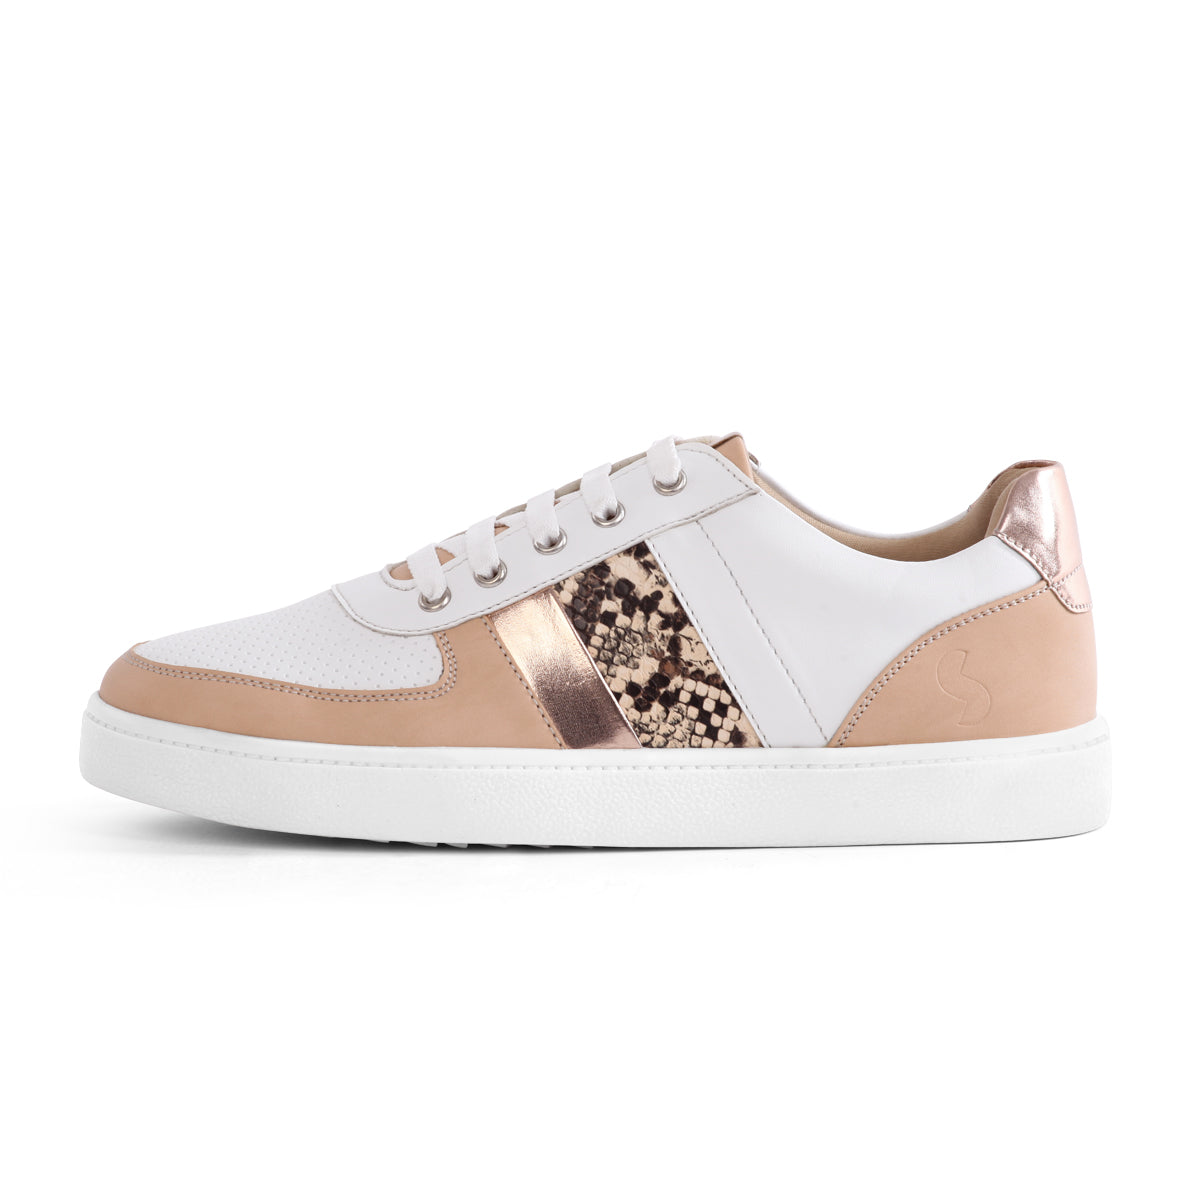 Viper Sneakers For Women - Solethreads